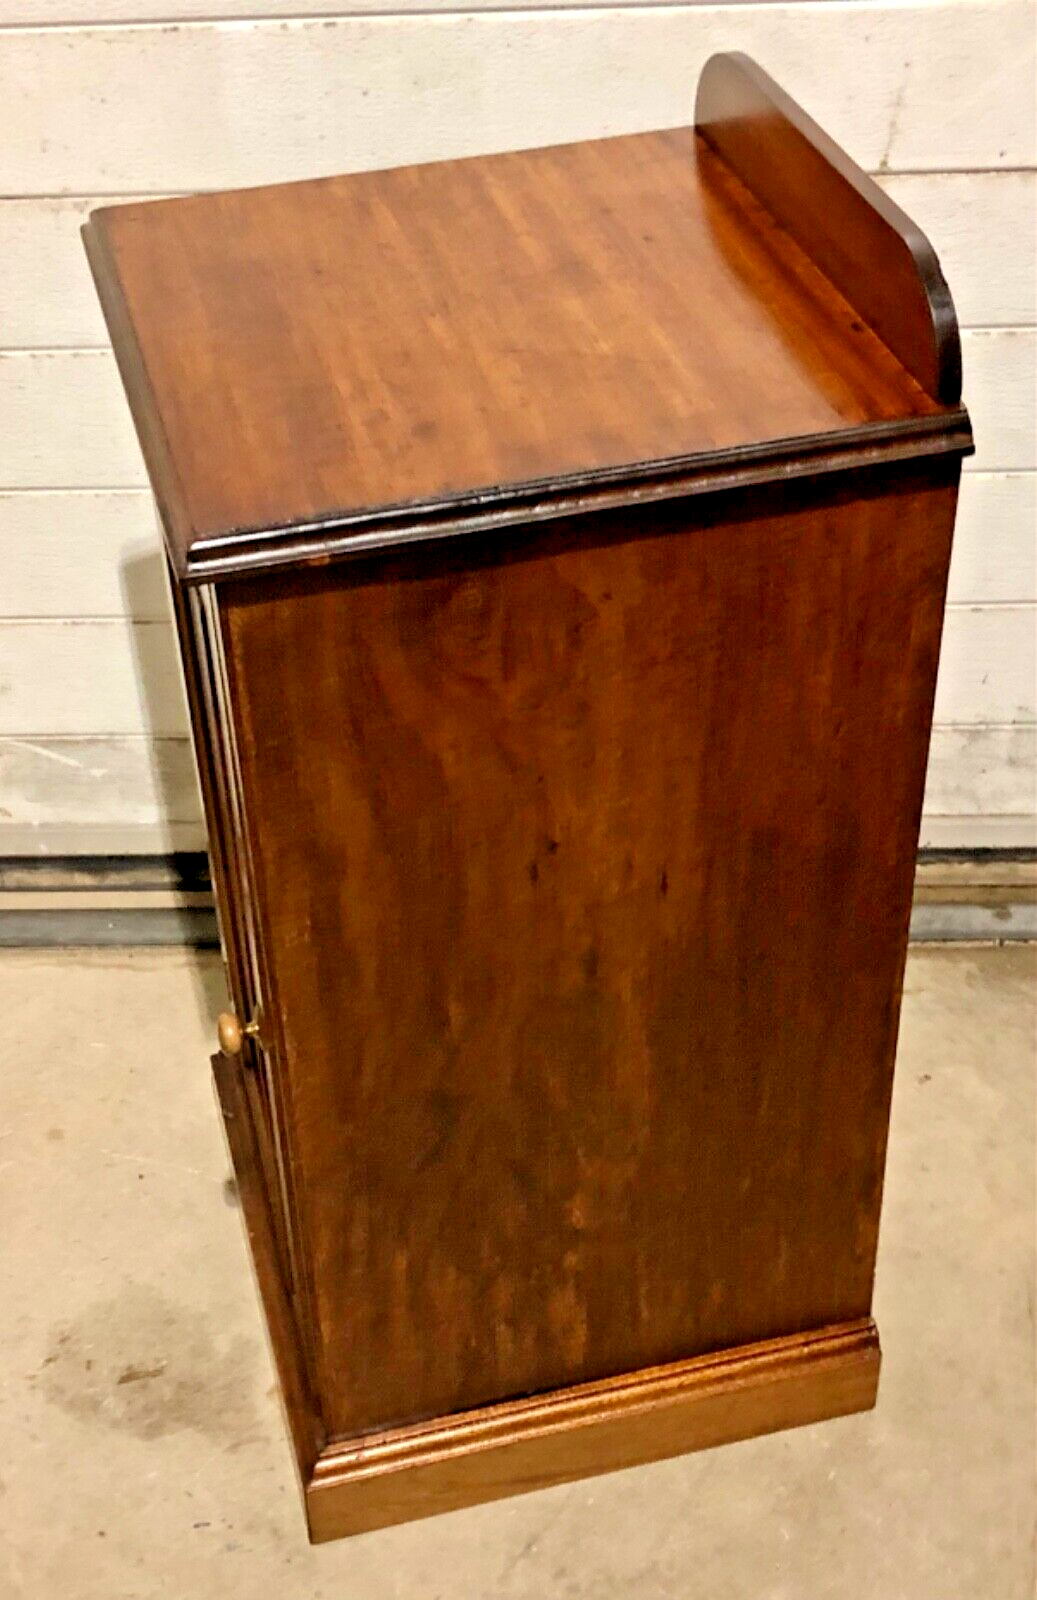 000803....Handsome Pair Of Vintage Mahogany Bedside Tables  ( sold )